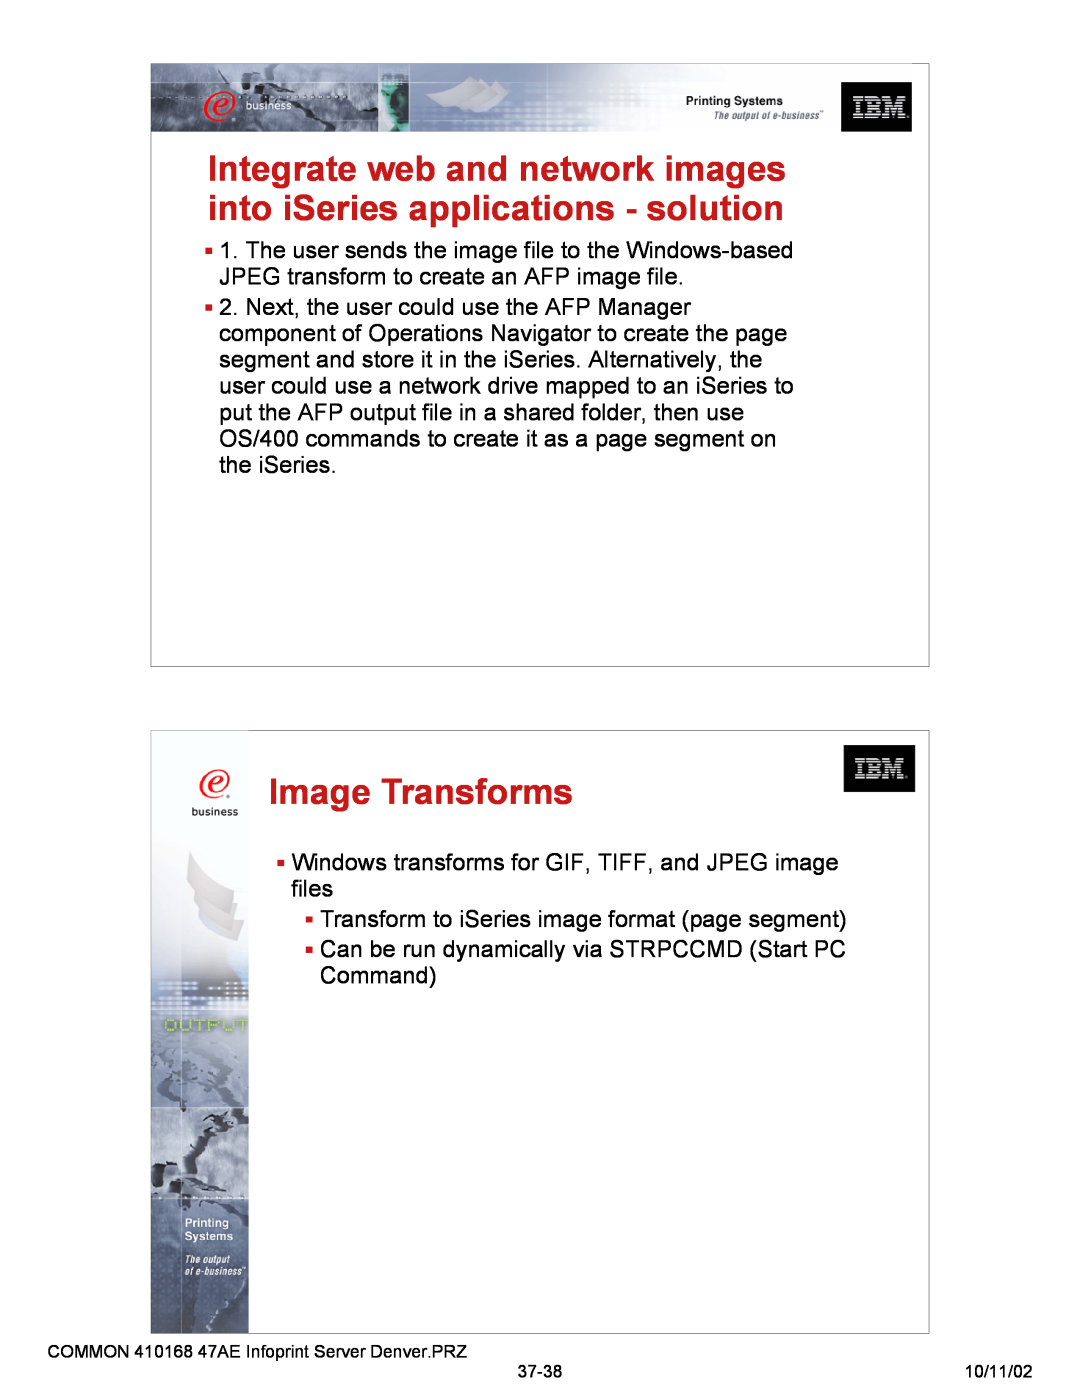 IBM 47AE - 410168 manual Image Transforms, Integrate web and network images into iSeries applications - solution 